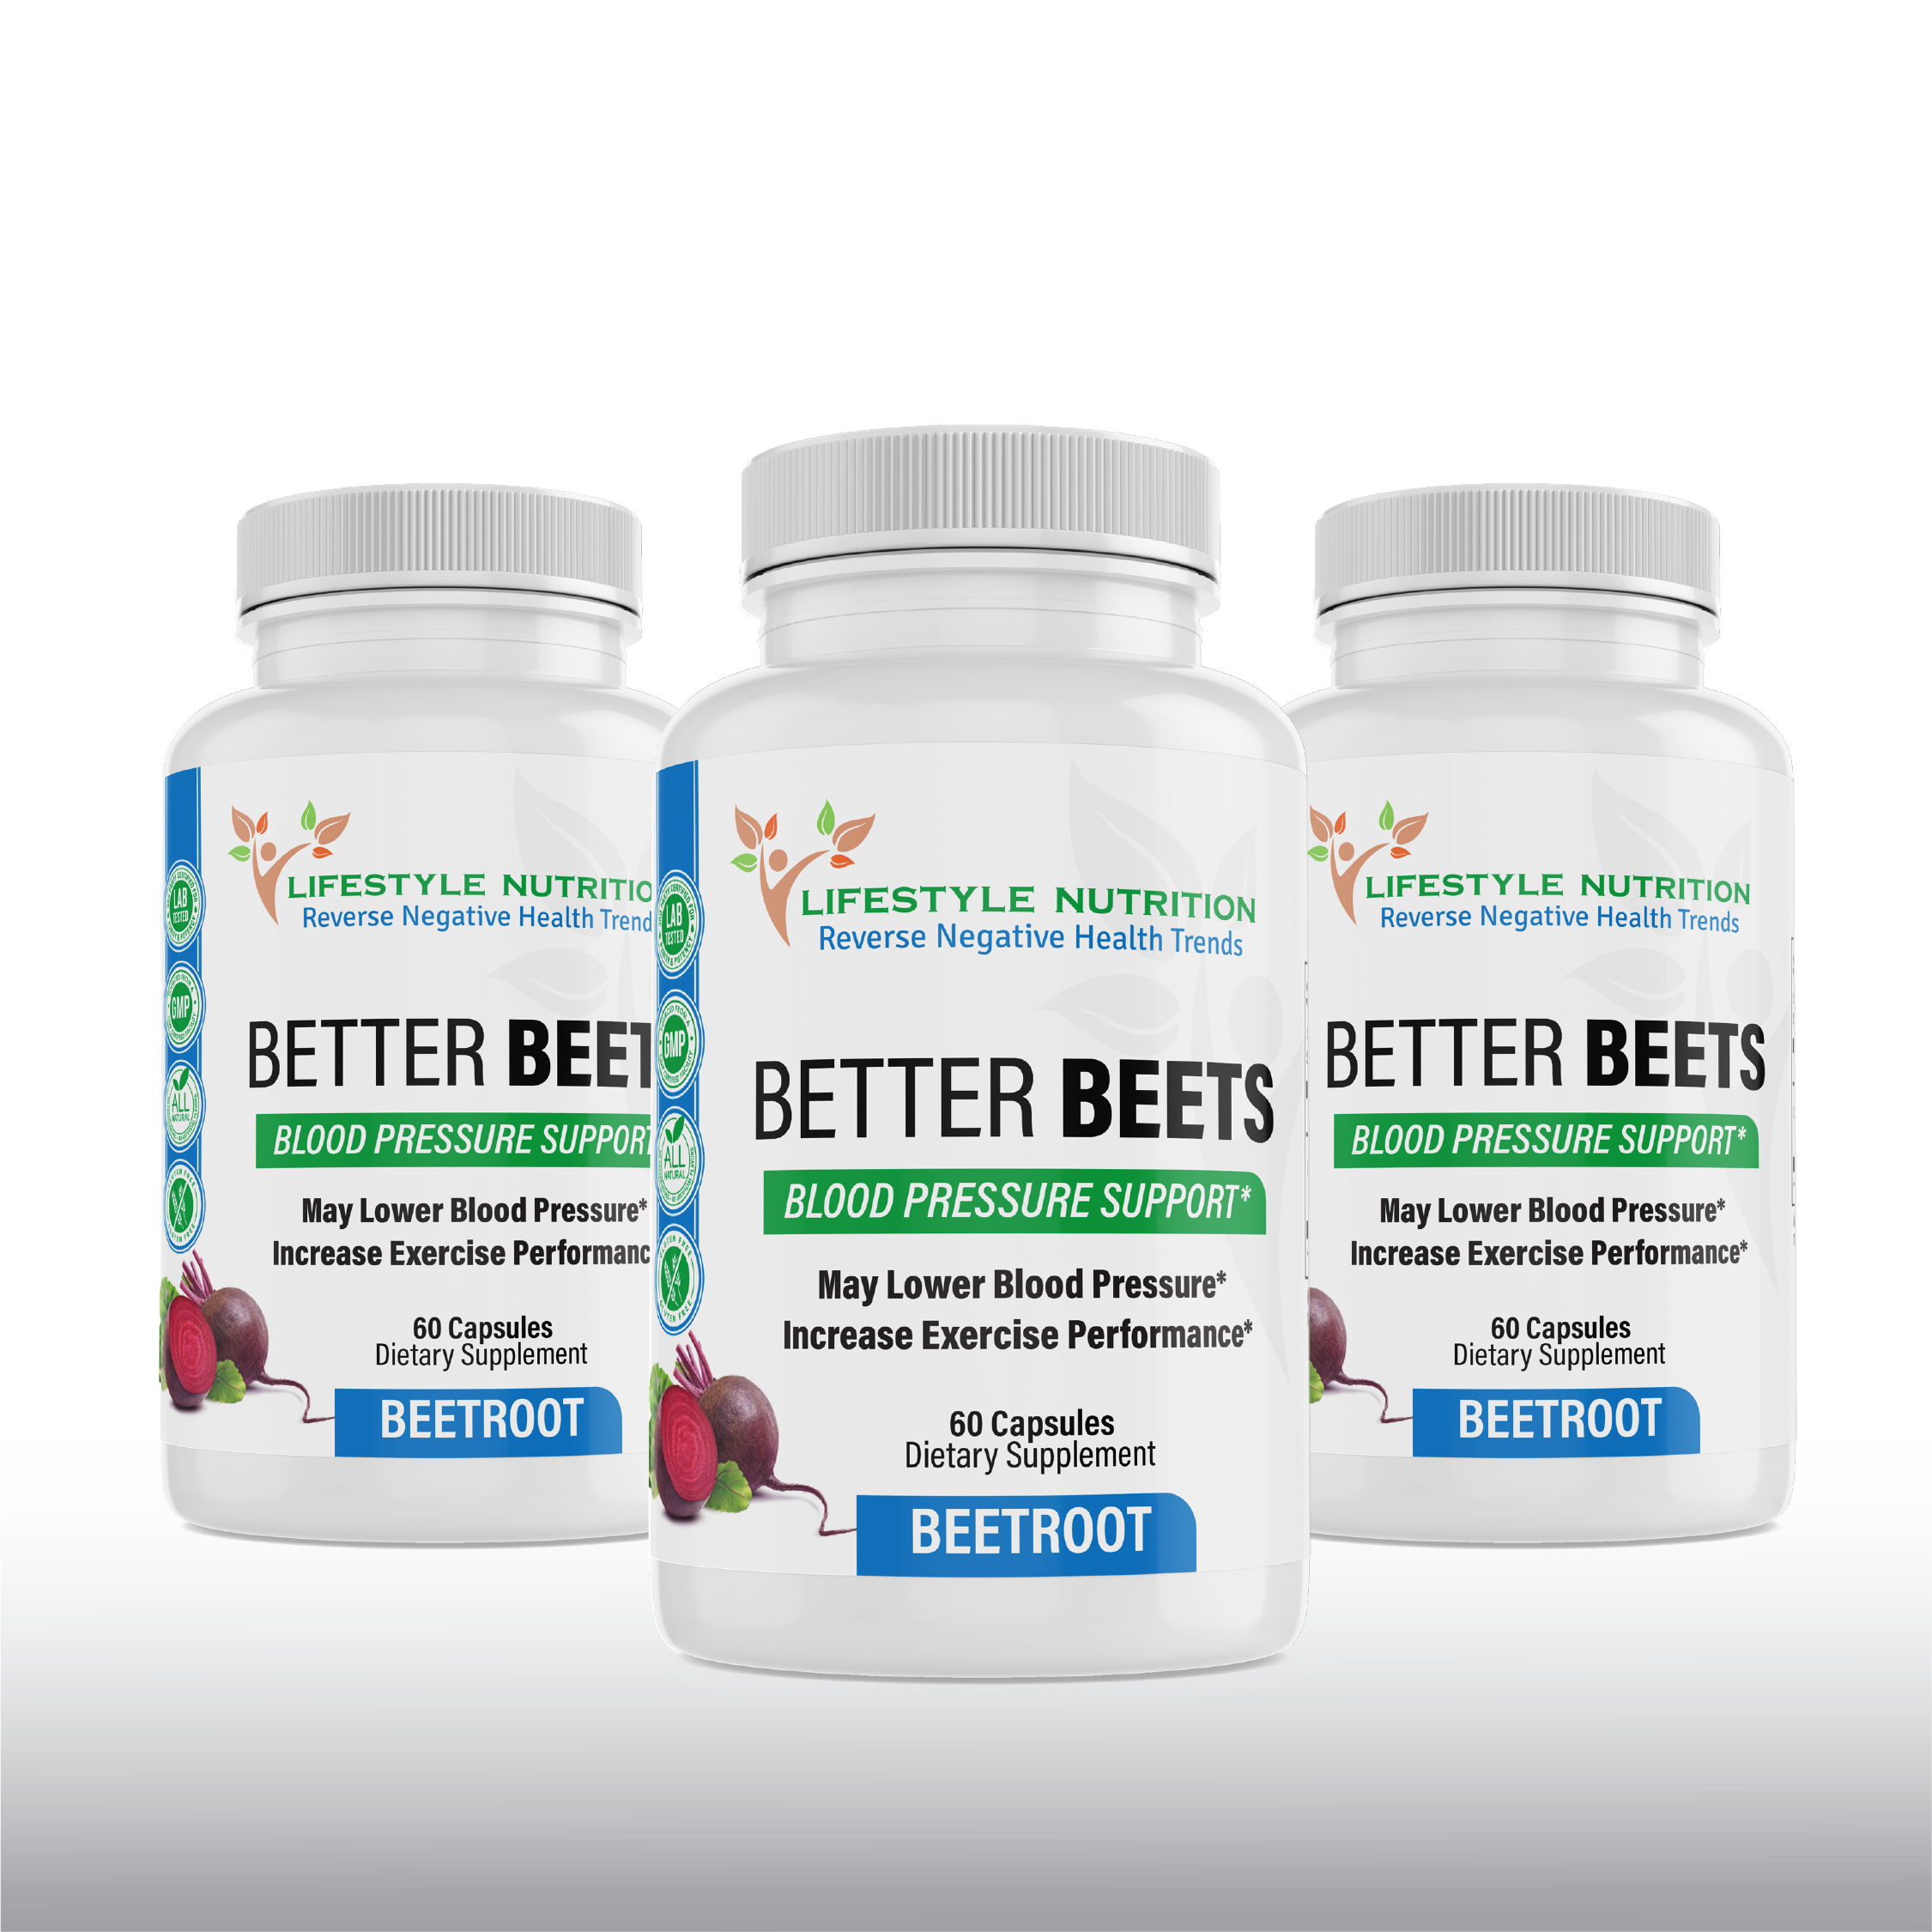 BETTER BEETS (3-Pack)